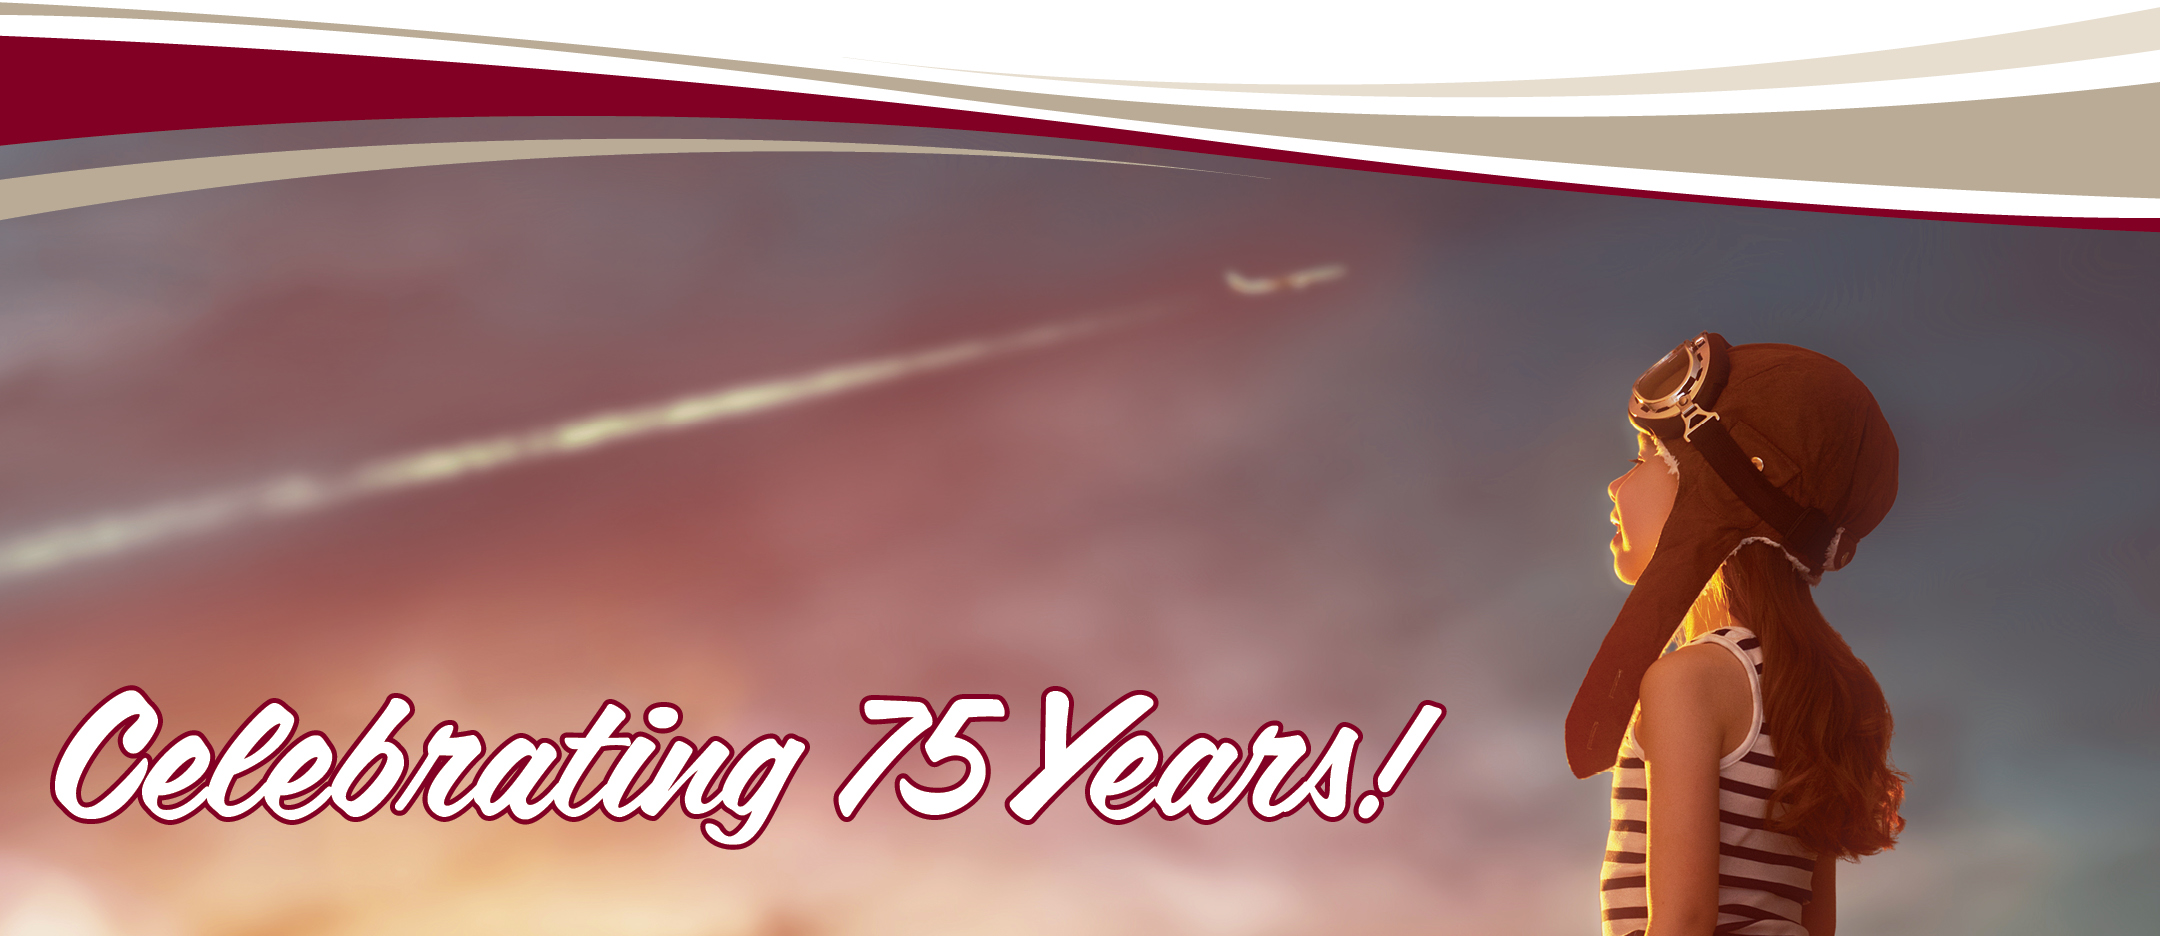 Image of a girl looking at a plane in the sky and saying Celebrating 75 years